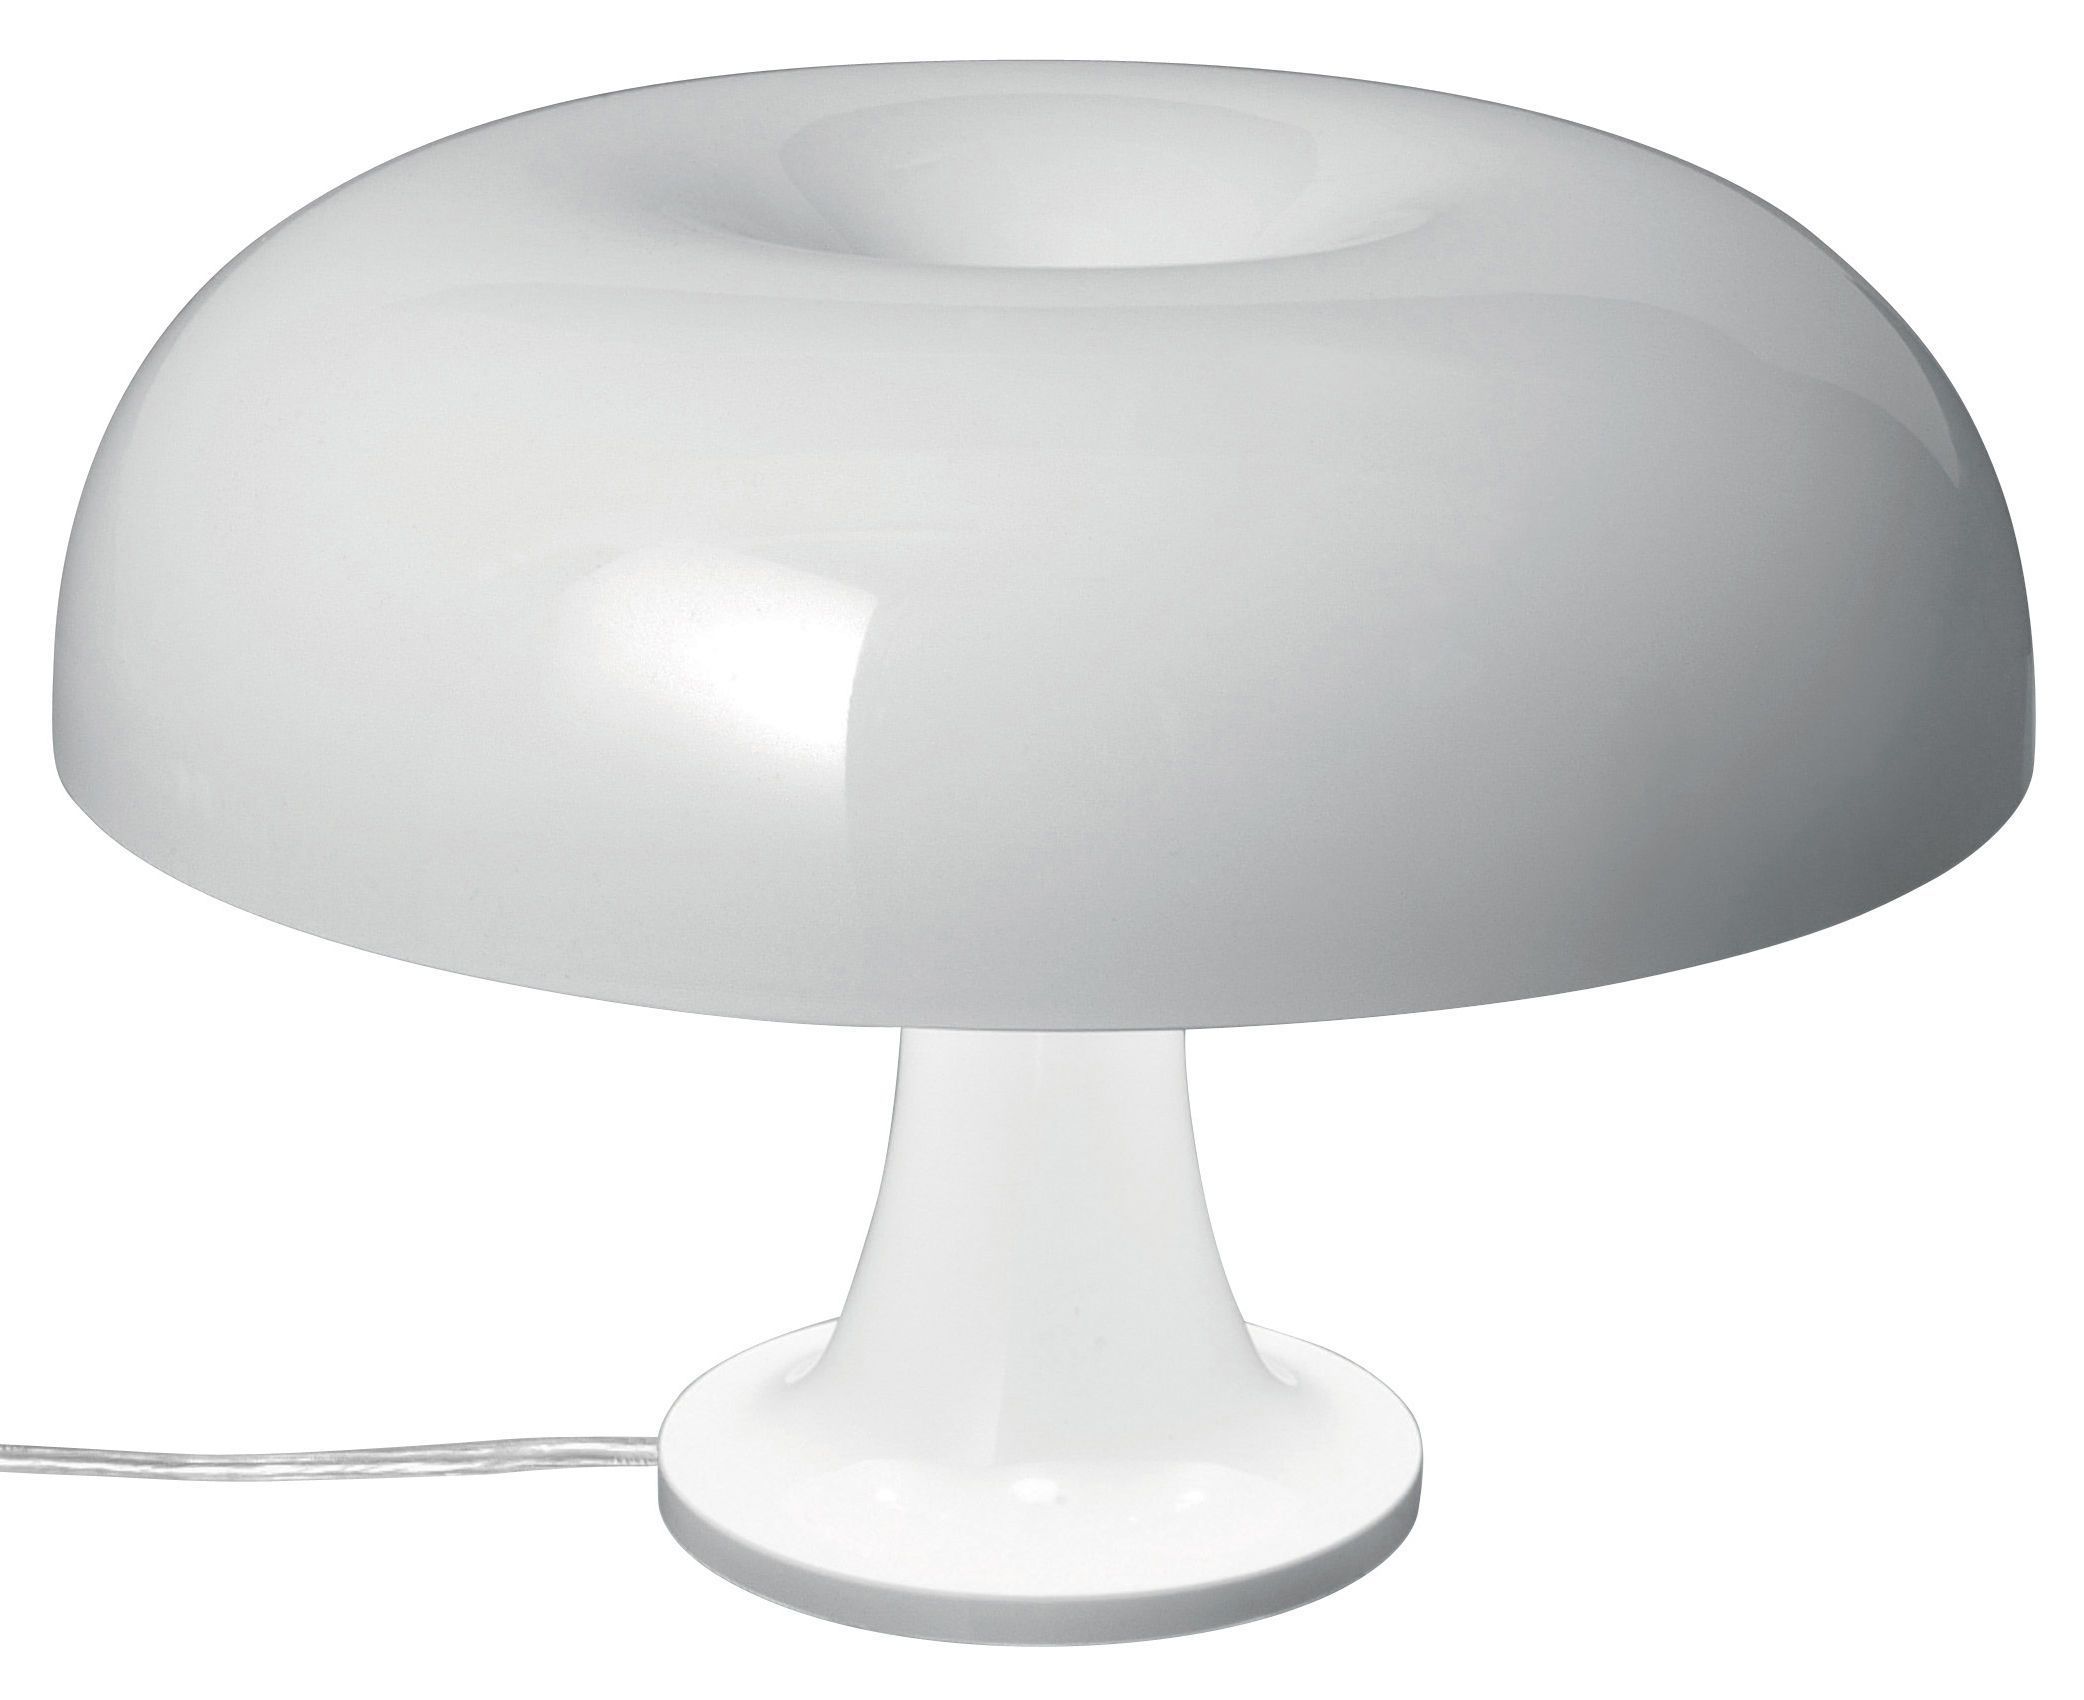 Table lamp NESSINO by Artemide